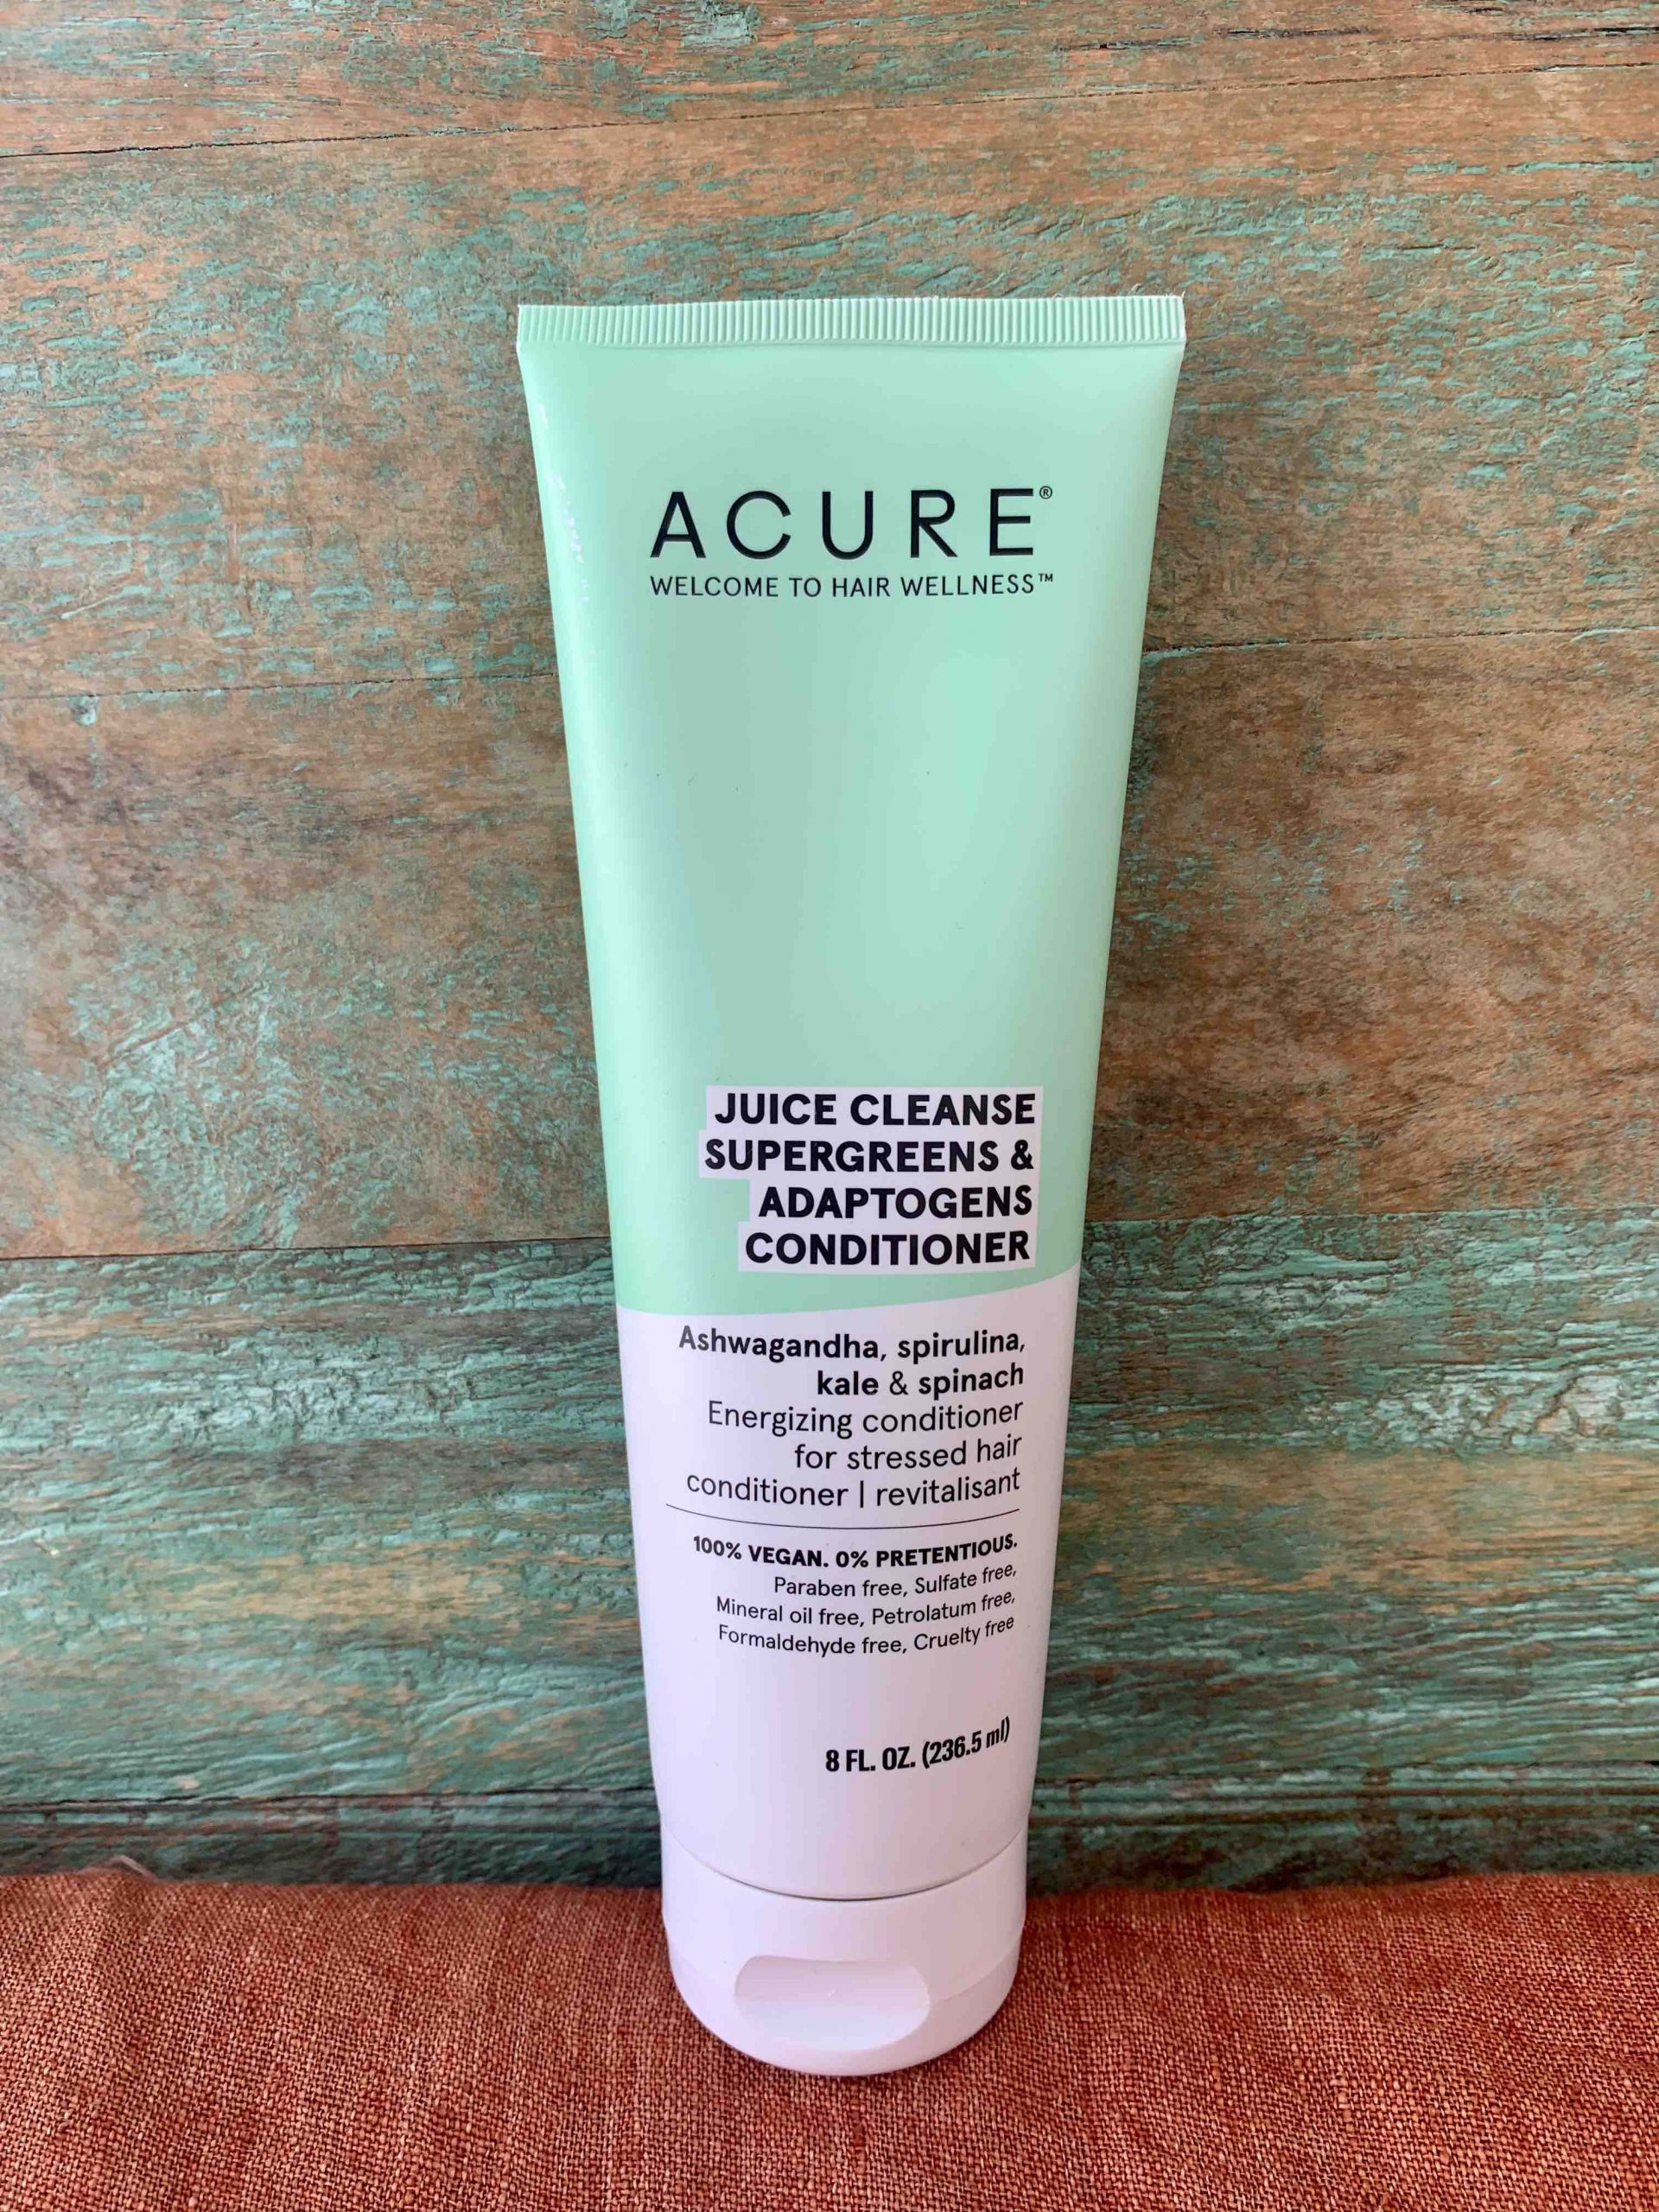 Acure Conditioner - Juice Cleanse Supergreens & Adaptogens